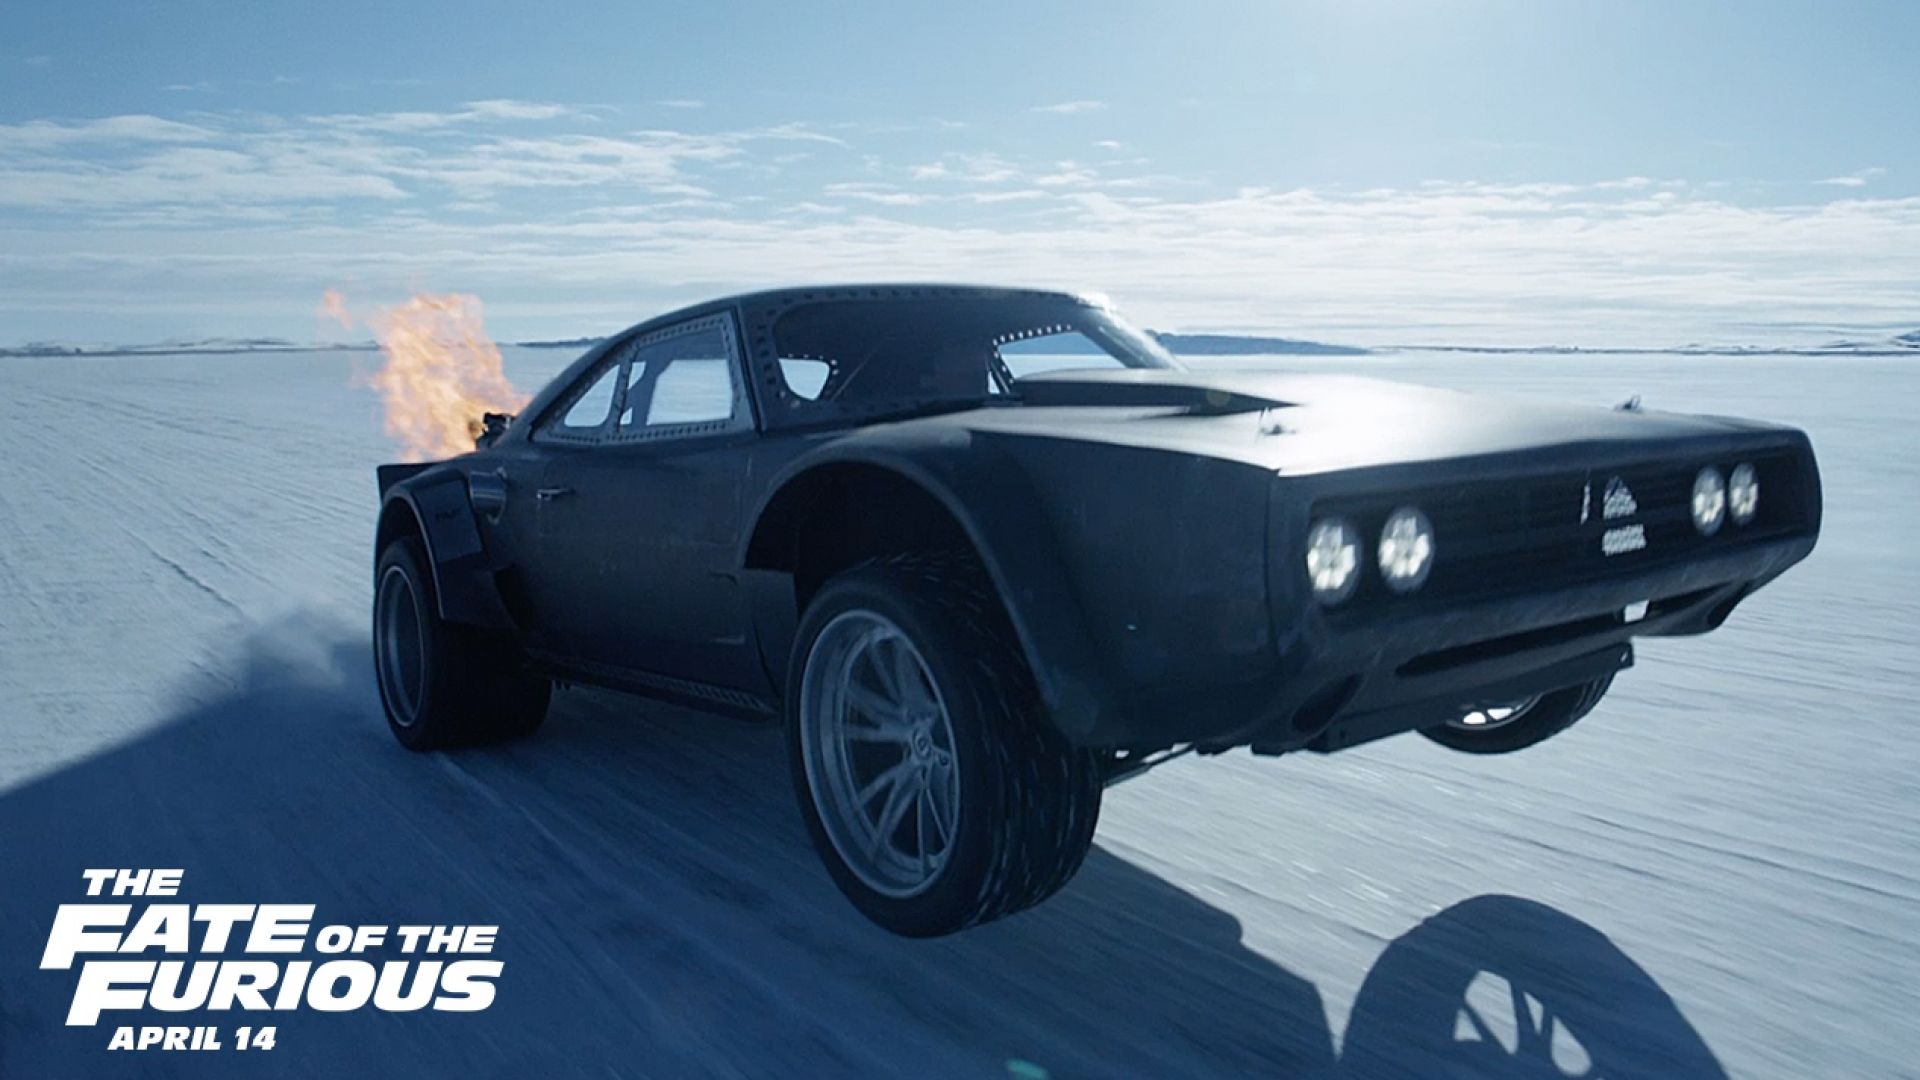 Check out the Super Bowl Spot for &#039;The Fate of the Furious&#039;